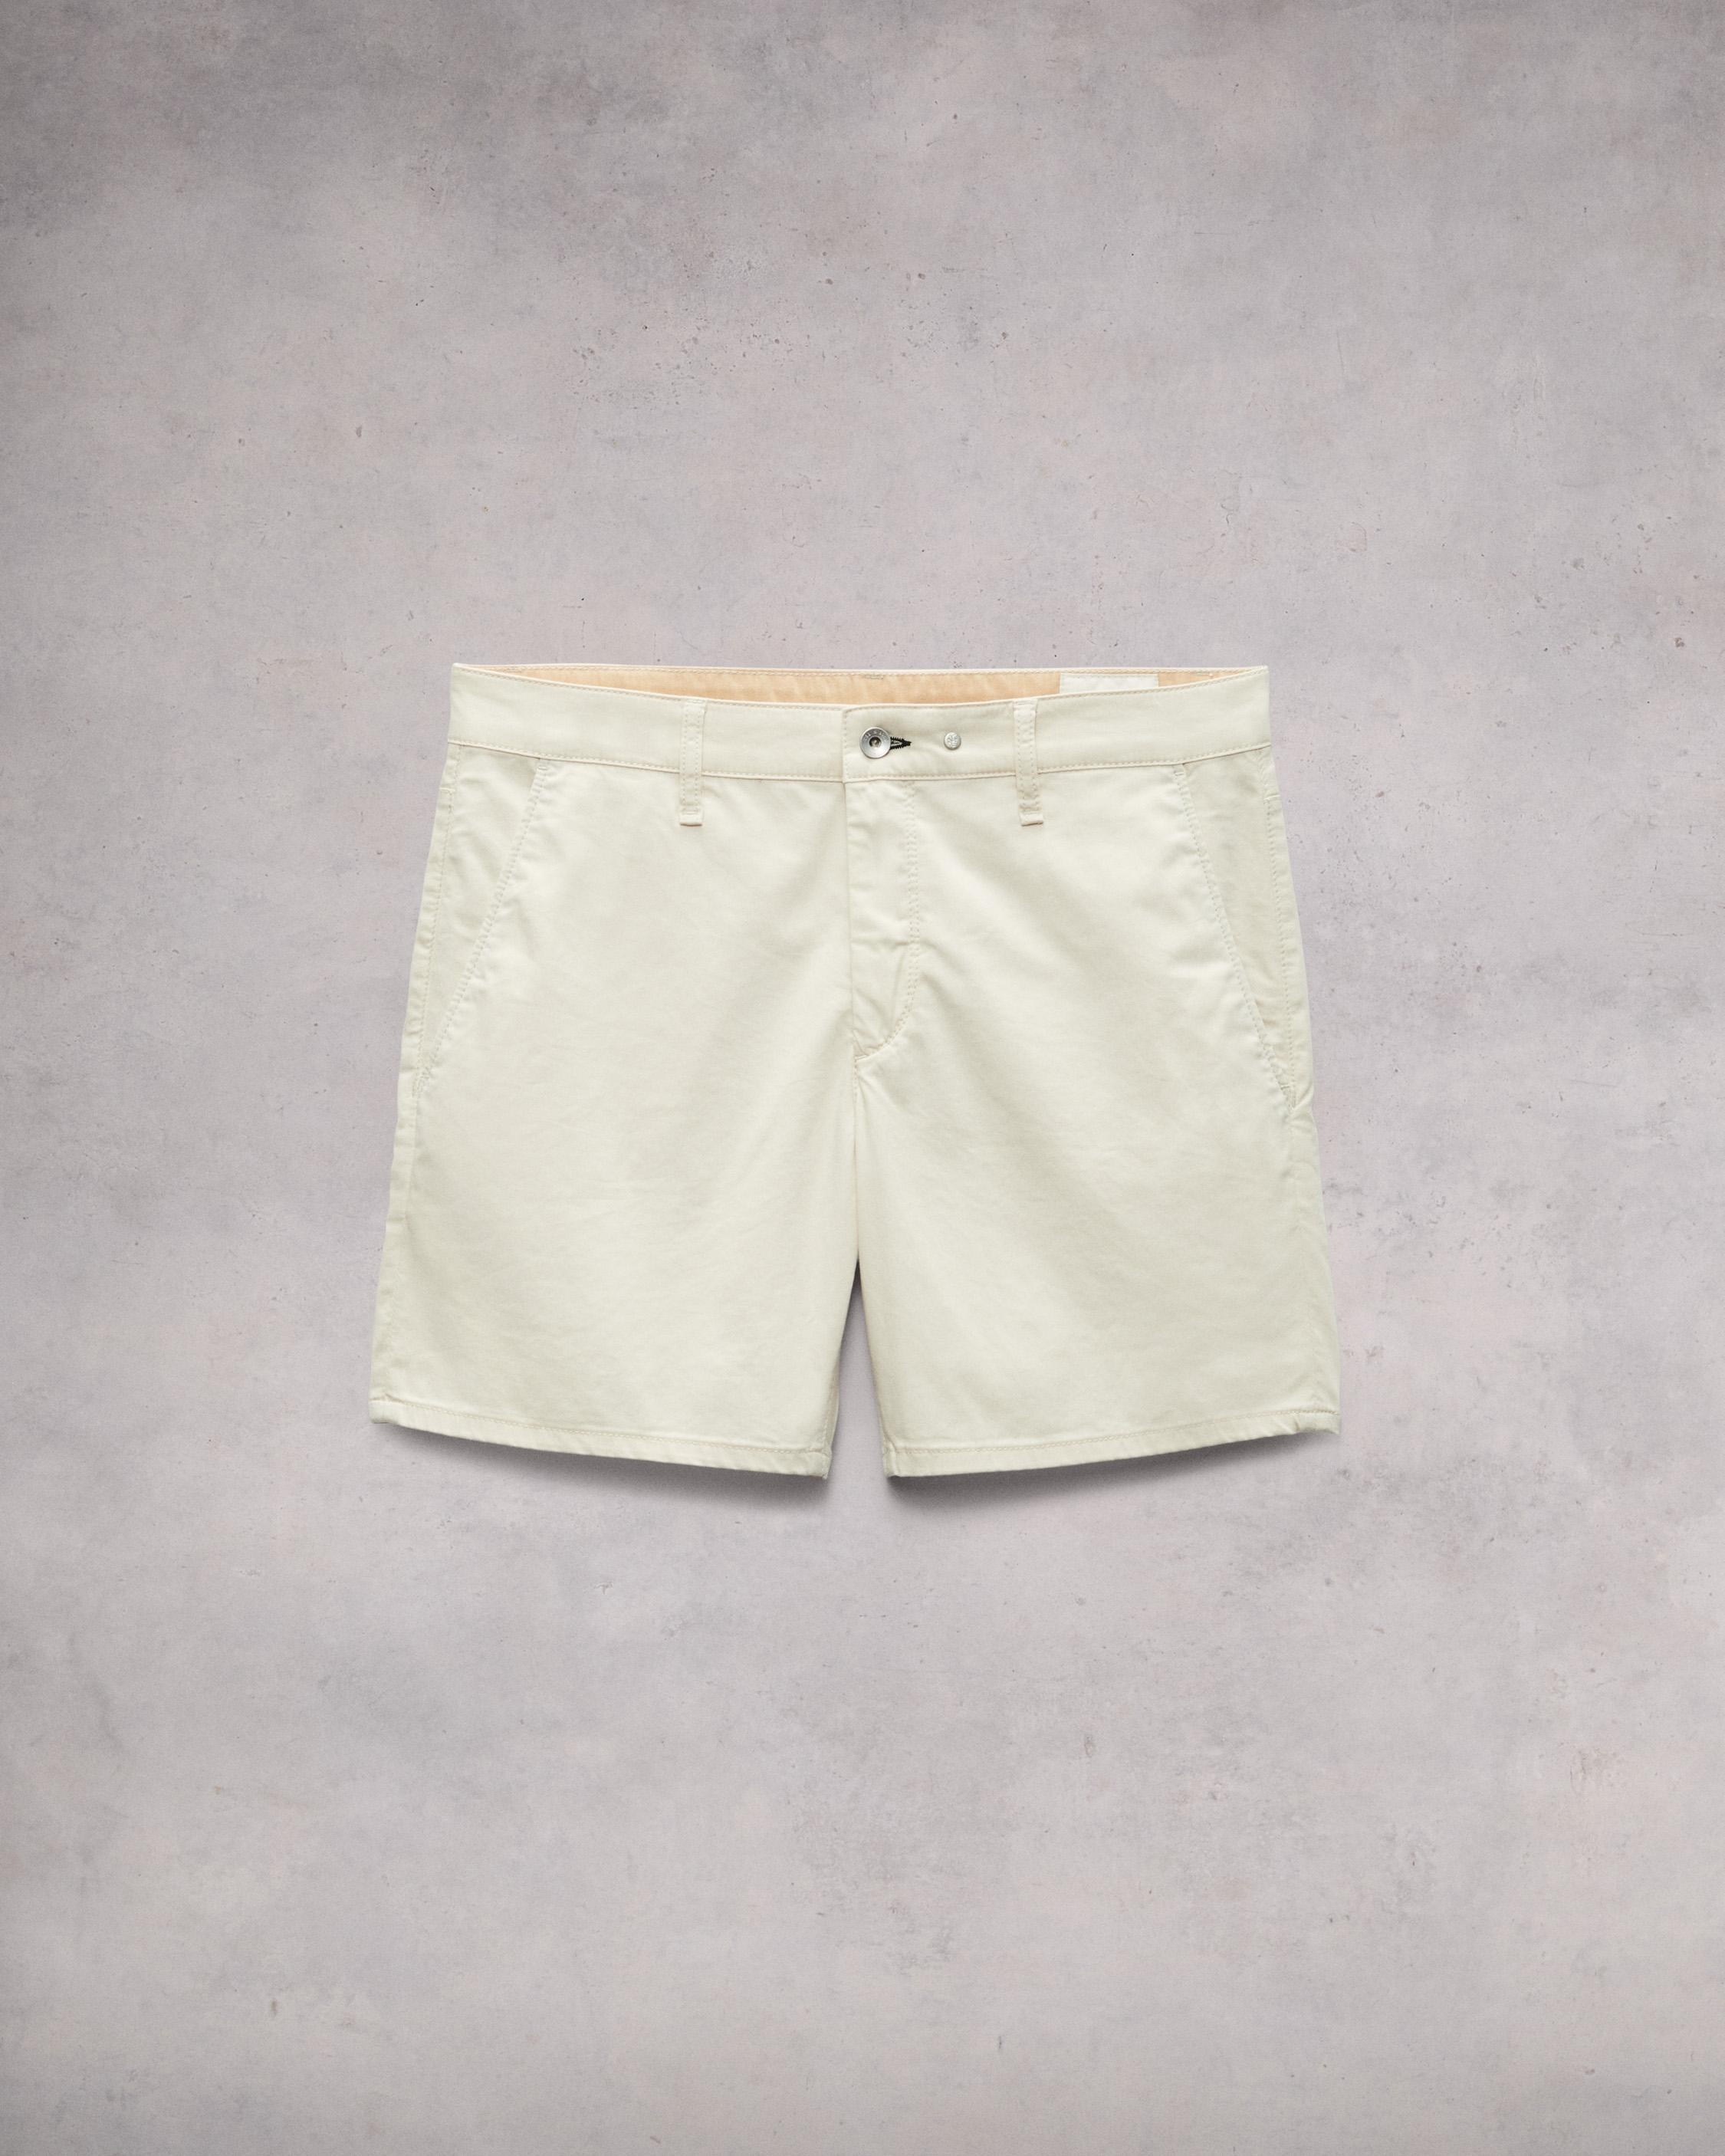 Standard Cotton Chino Short
Classic Fit - 1